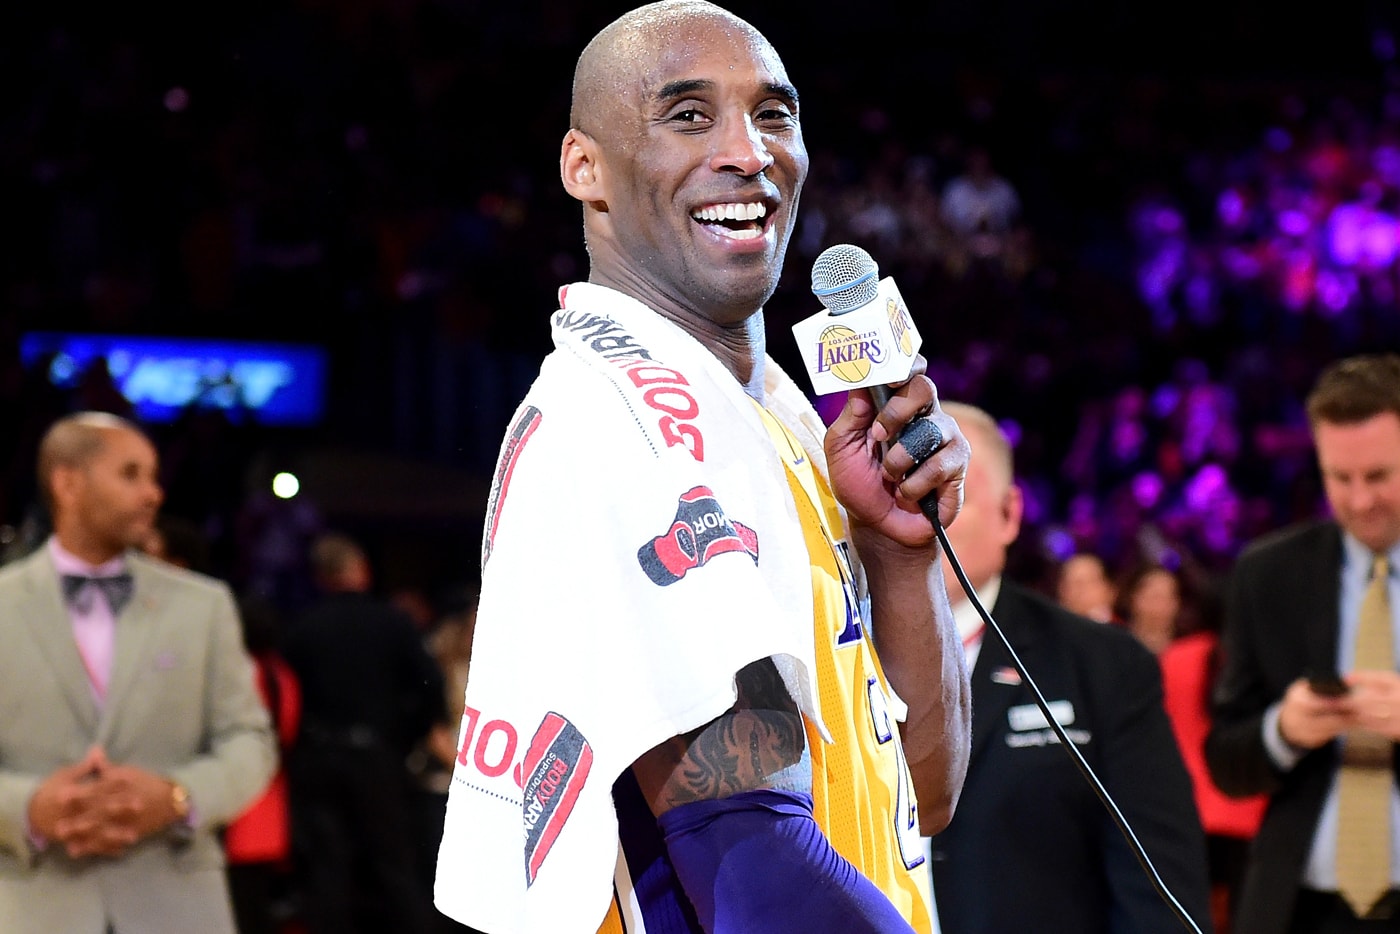 kobe-bryant-congratulated-by-kanye-west-justin-bieber-snoop-dogg-ice-cube-justin-timberlake-more